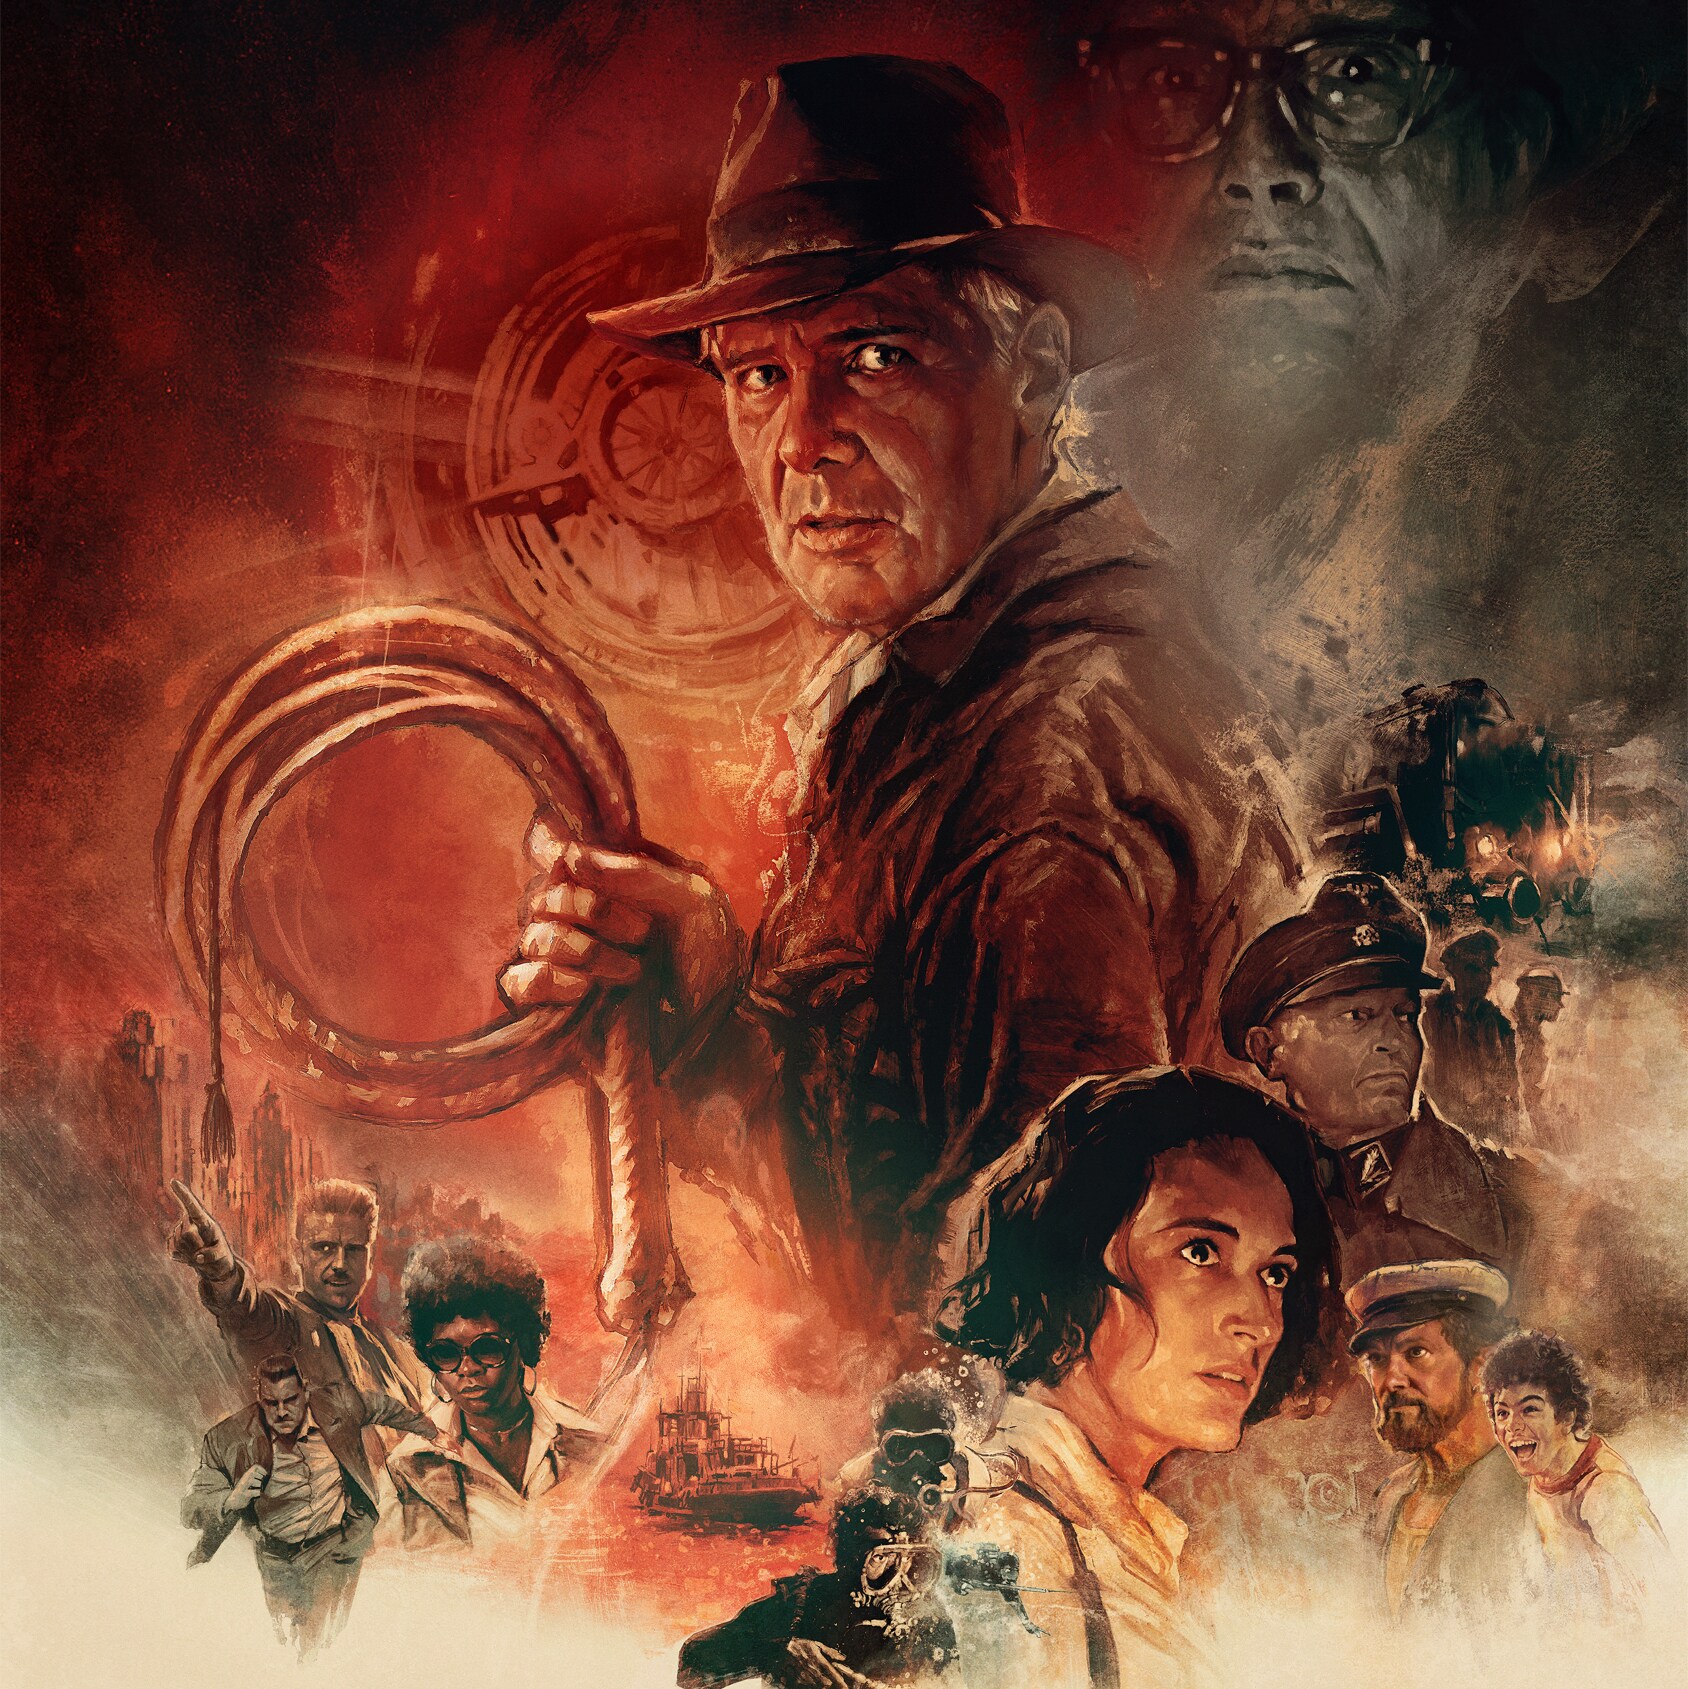 When can you stream Indiana Jones and the Dial of Destiny on Disney Plus?